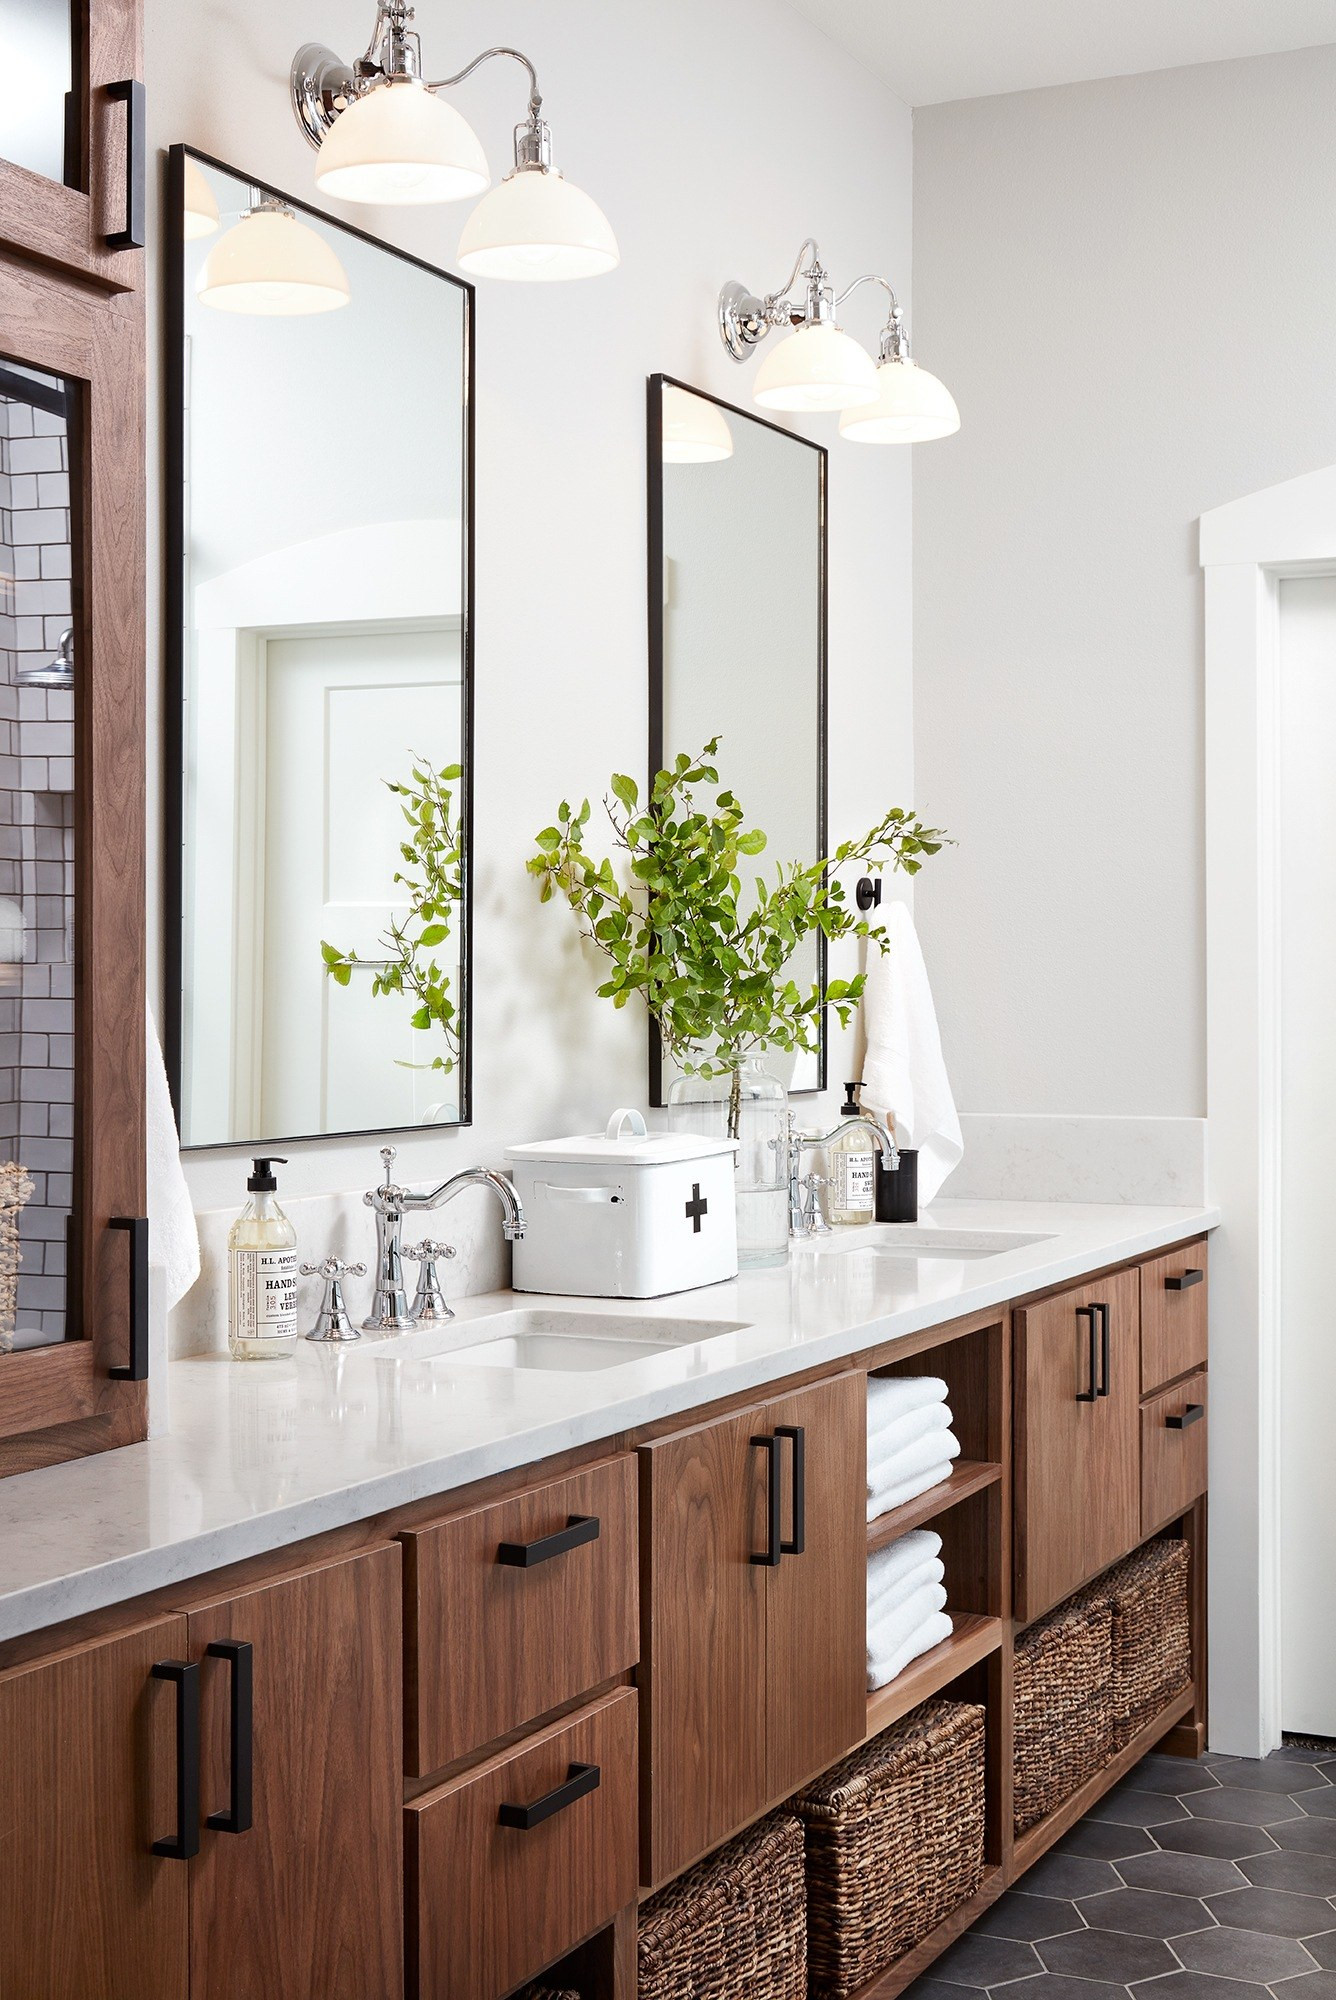 Joanna Gaines Bathroom Design
 Joanna Gaines Has These Brilliant Tips for Creating the